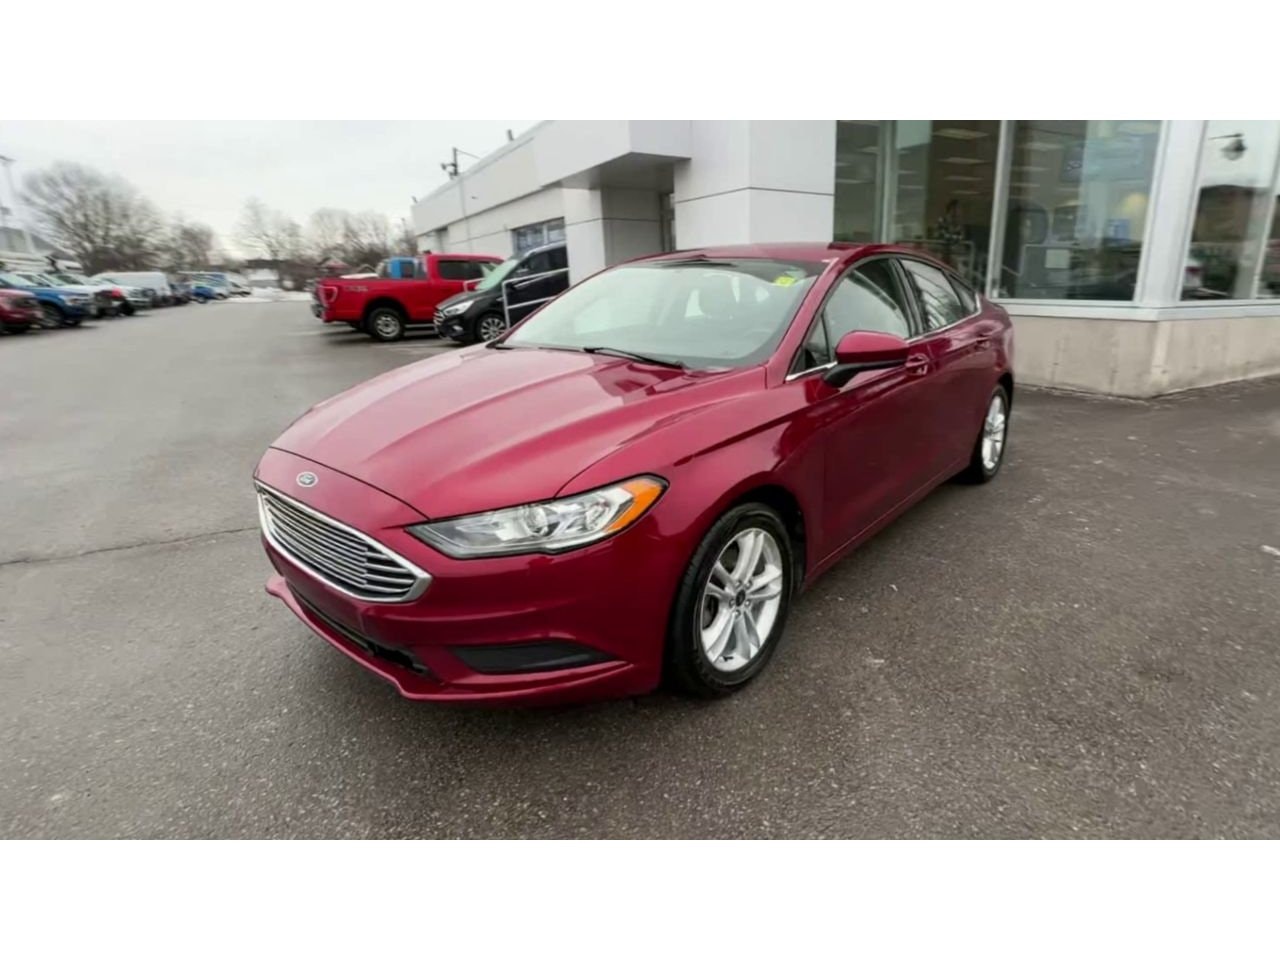 2018 Ford Fusion - P20810 Full Image 4